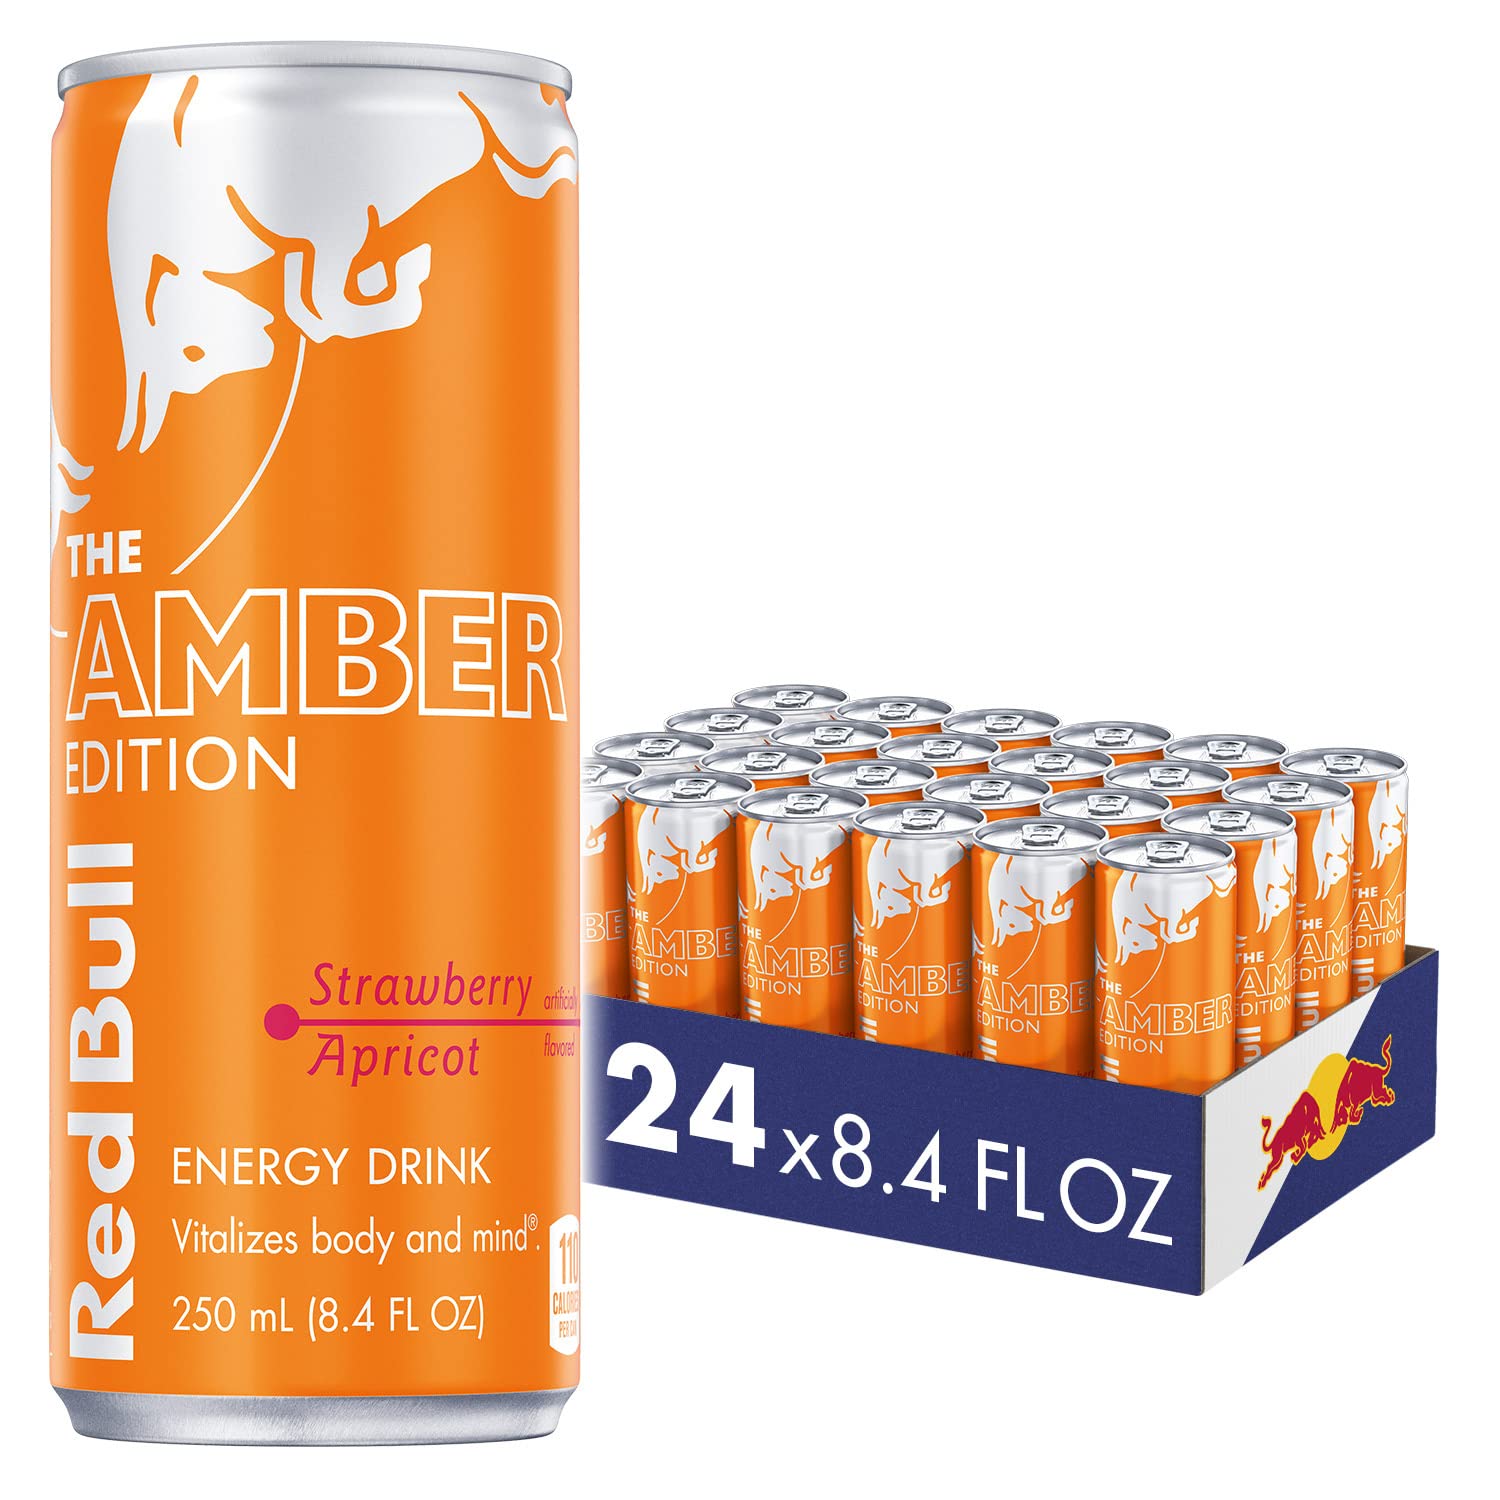 [S&S] $23.05: 24-Count 8.4-Oz Red Bull Blue Edition Energy Drinks (Strawberry Apricot)